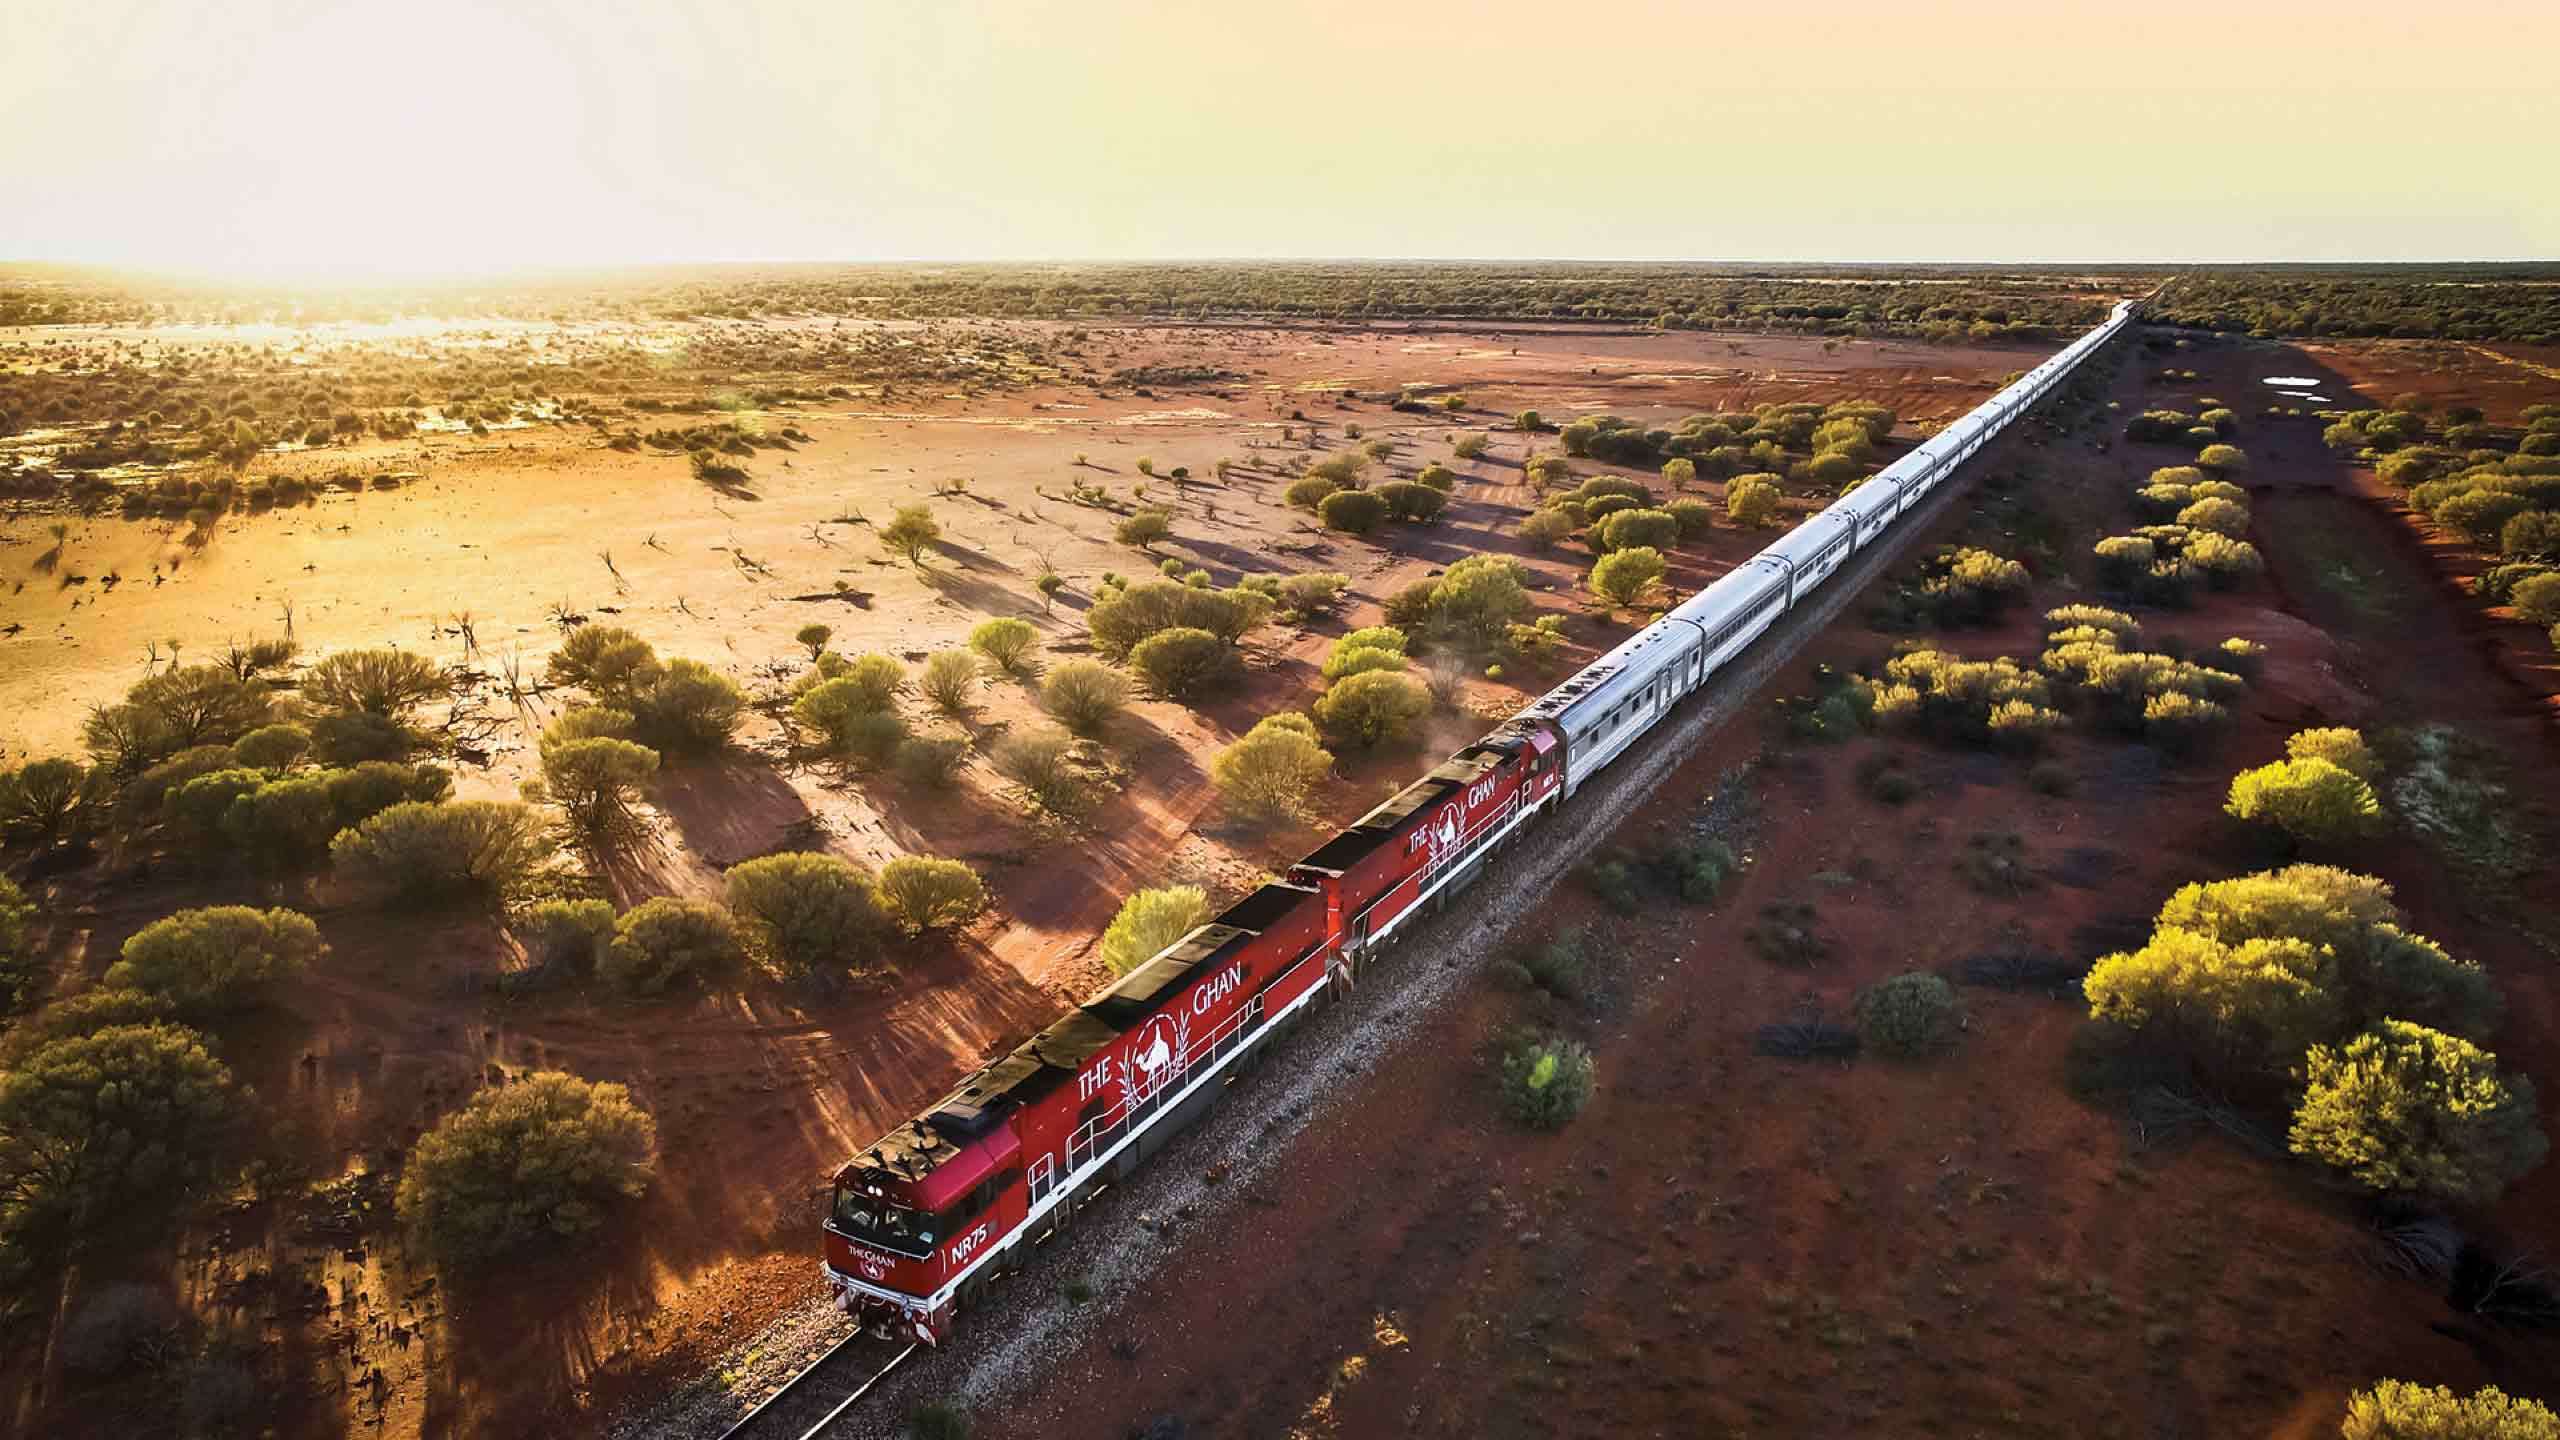 “THE GHAN” Outback Rail Journey (Adelaide to Alice Springs) 2D1N